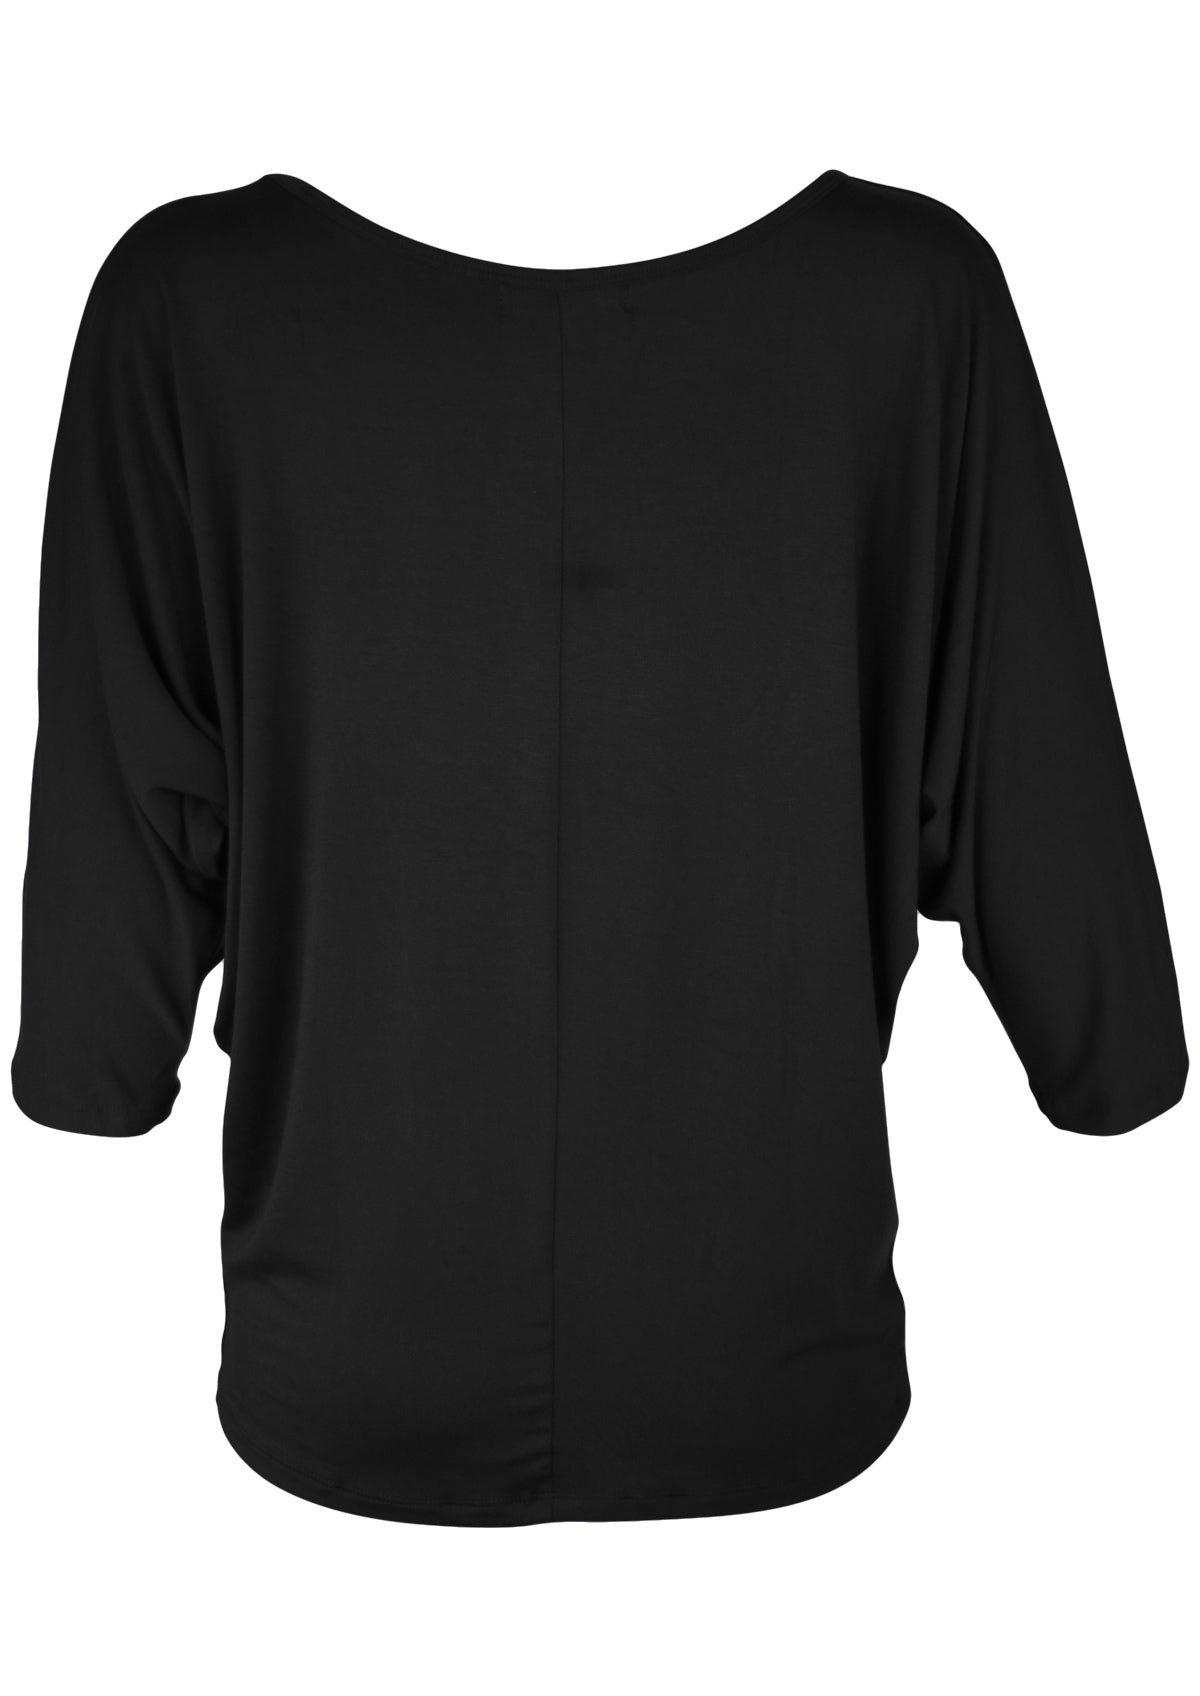 Back view women's 3/4 sleeve rayon batwing v-neck black top.